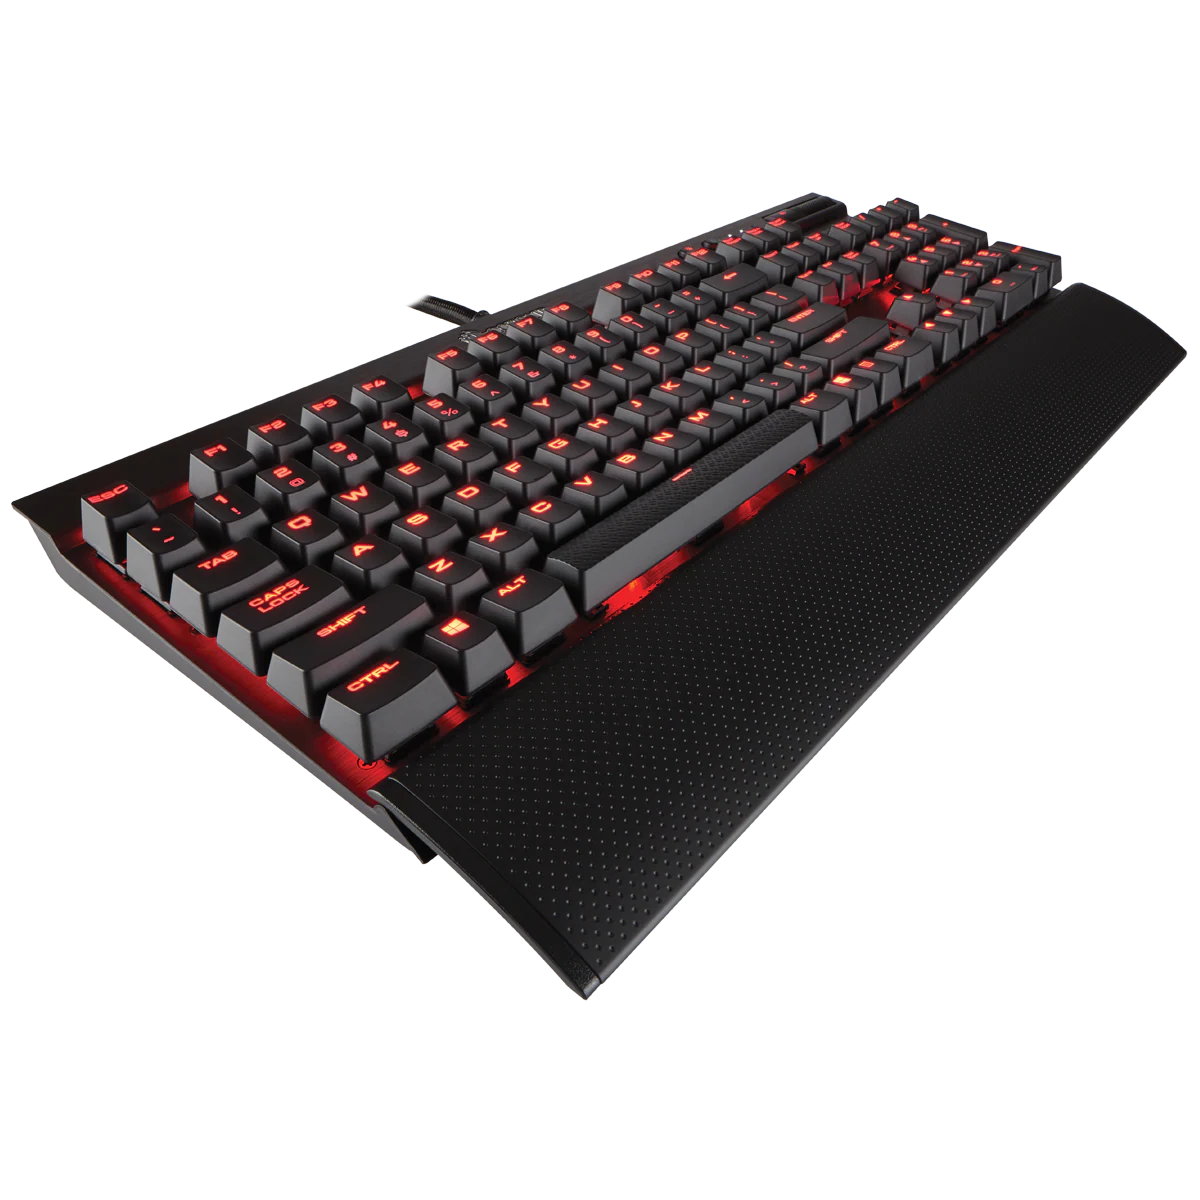 TECLADO CORSAIR K70 LUX RED LED MECHANICAL ING CH-9101020-NA